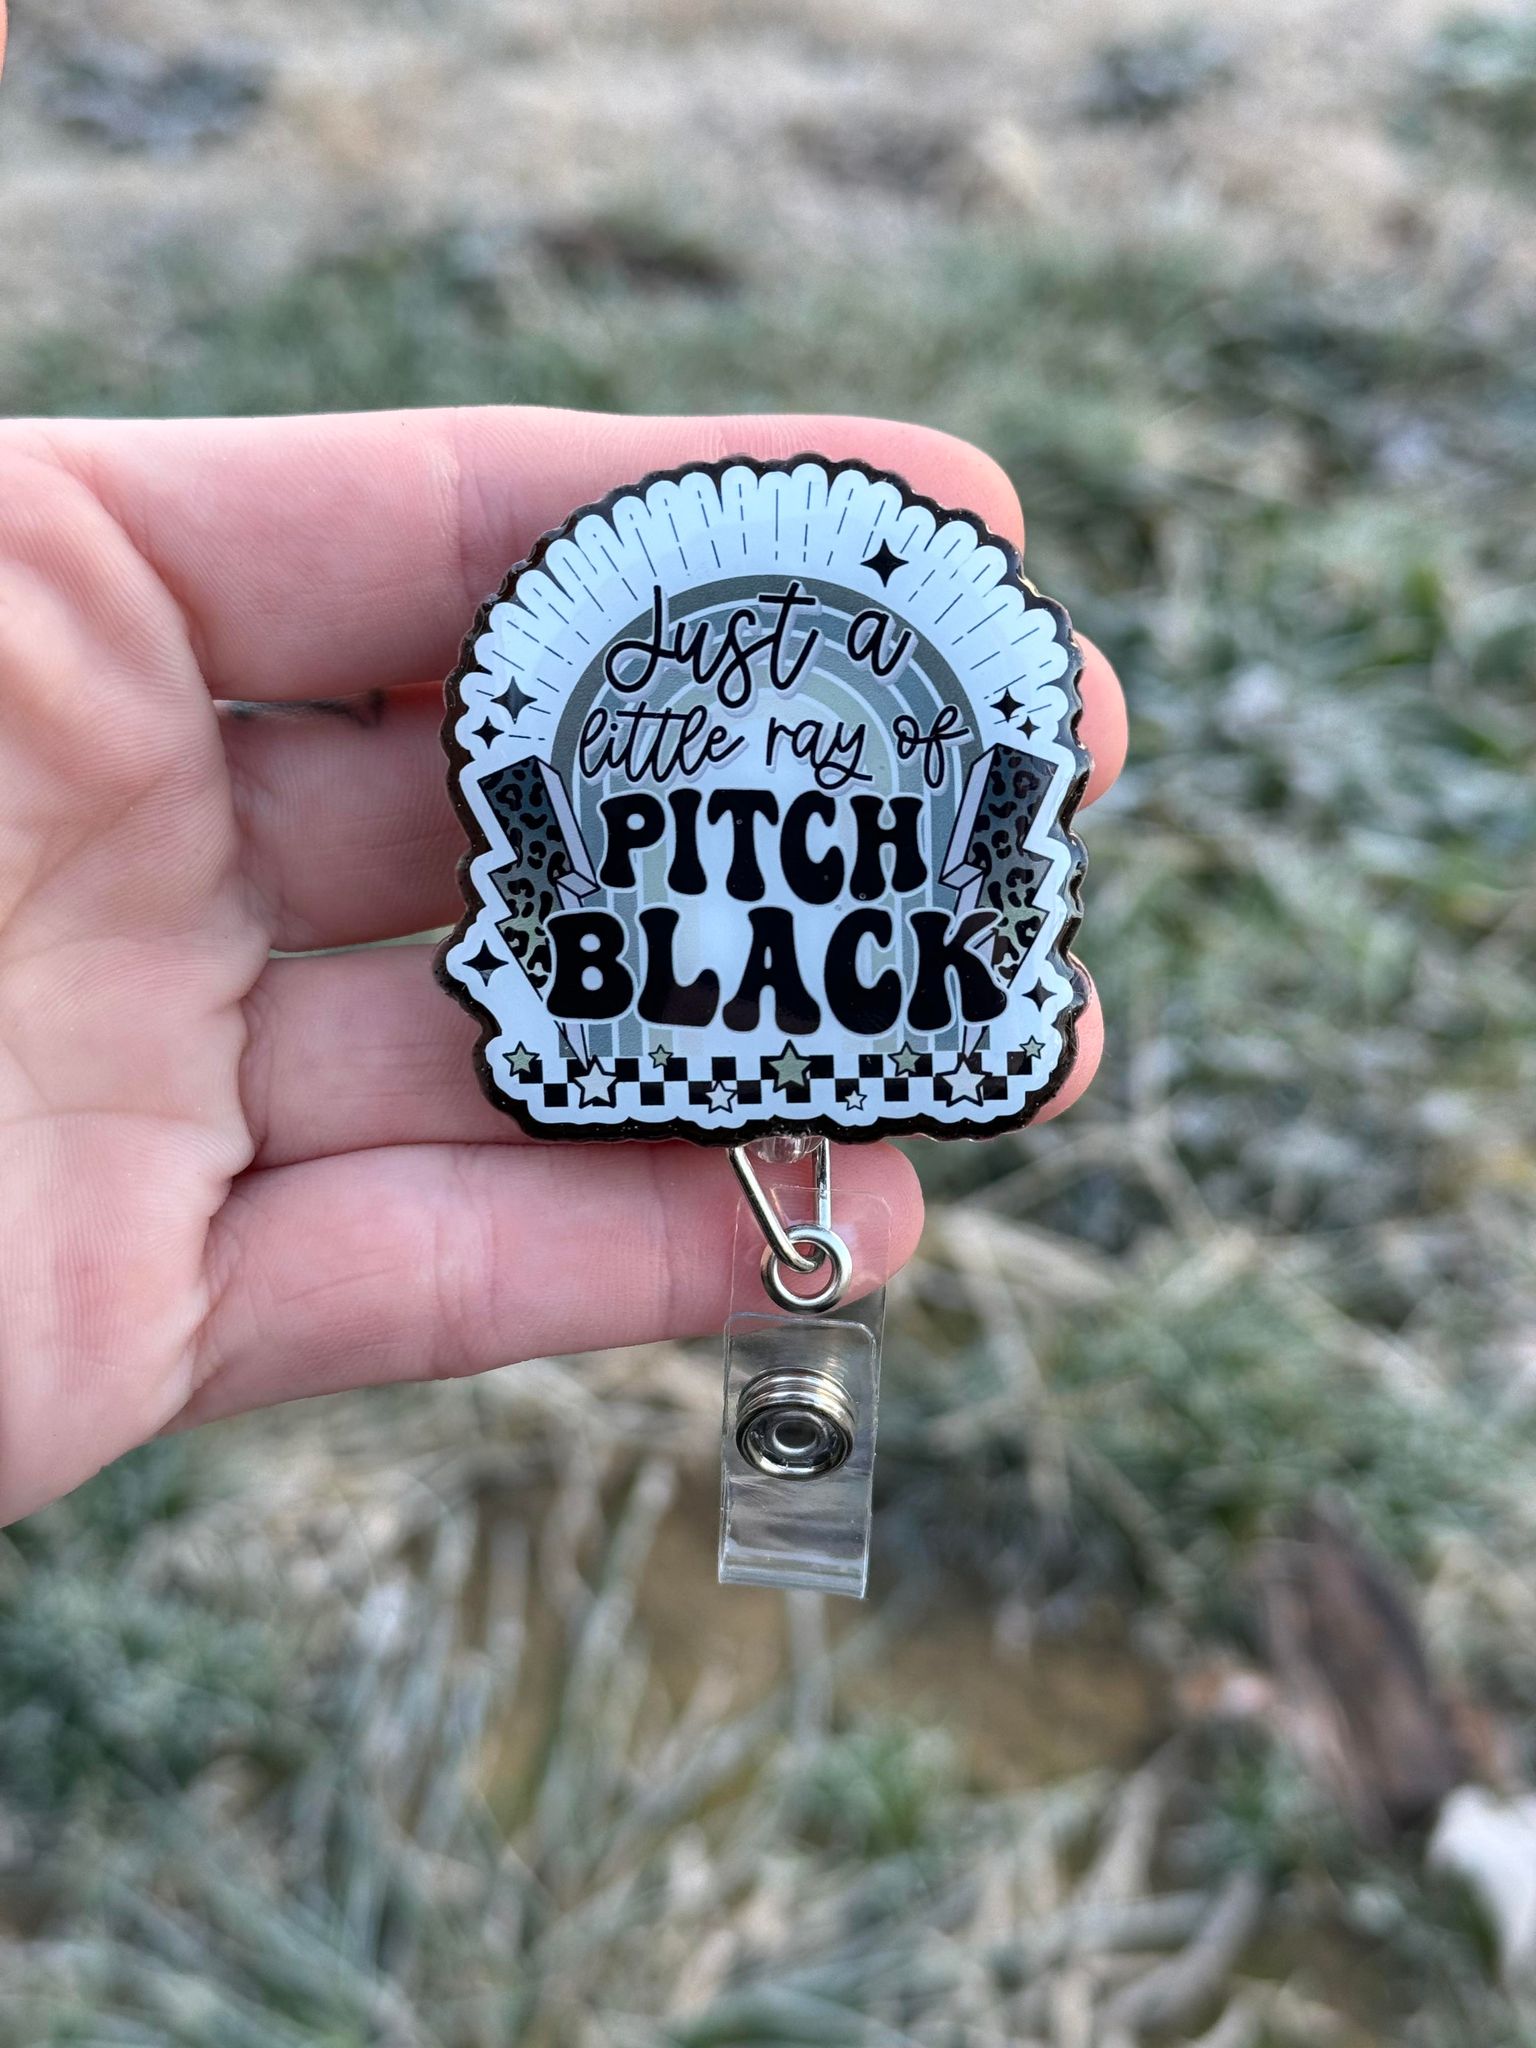 Ray of Pitch Black Badge Reel, Emo Badge Reel, Black and White, Black and white Leopard